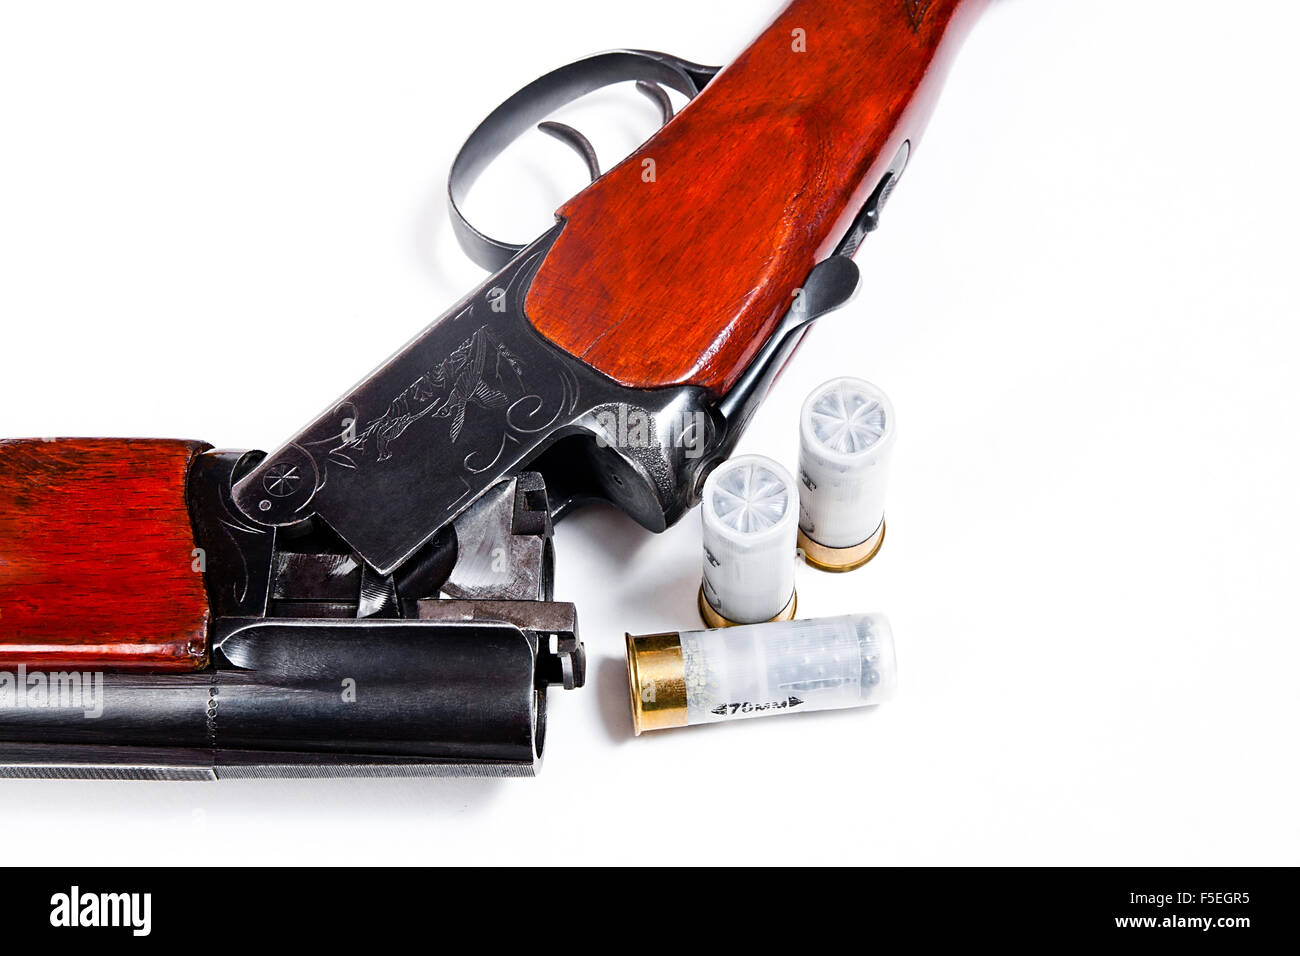 Hunting shotgun and ammunition on white background. Cartridges for hunting rifle. Close up view showing mechanism of rifle Stock Photo